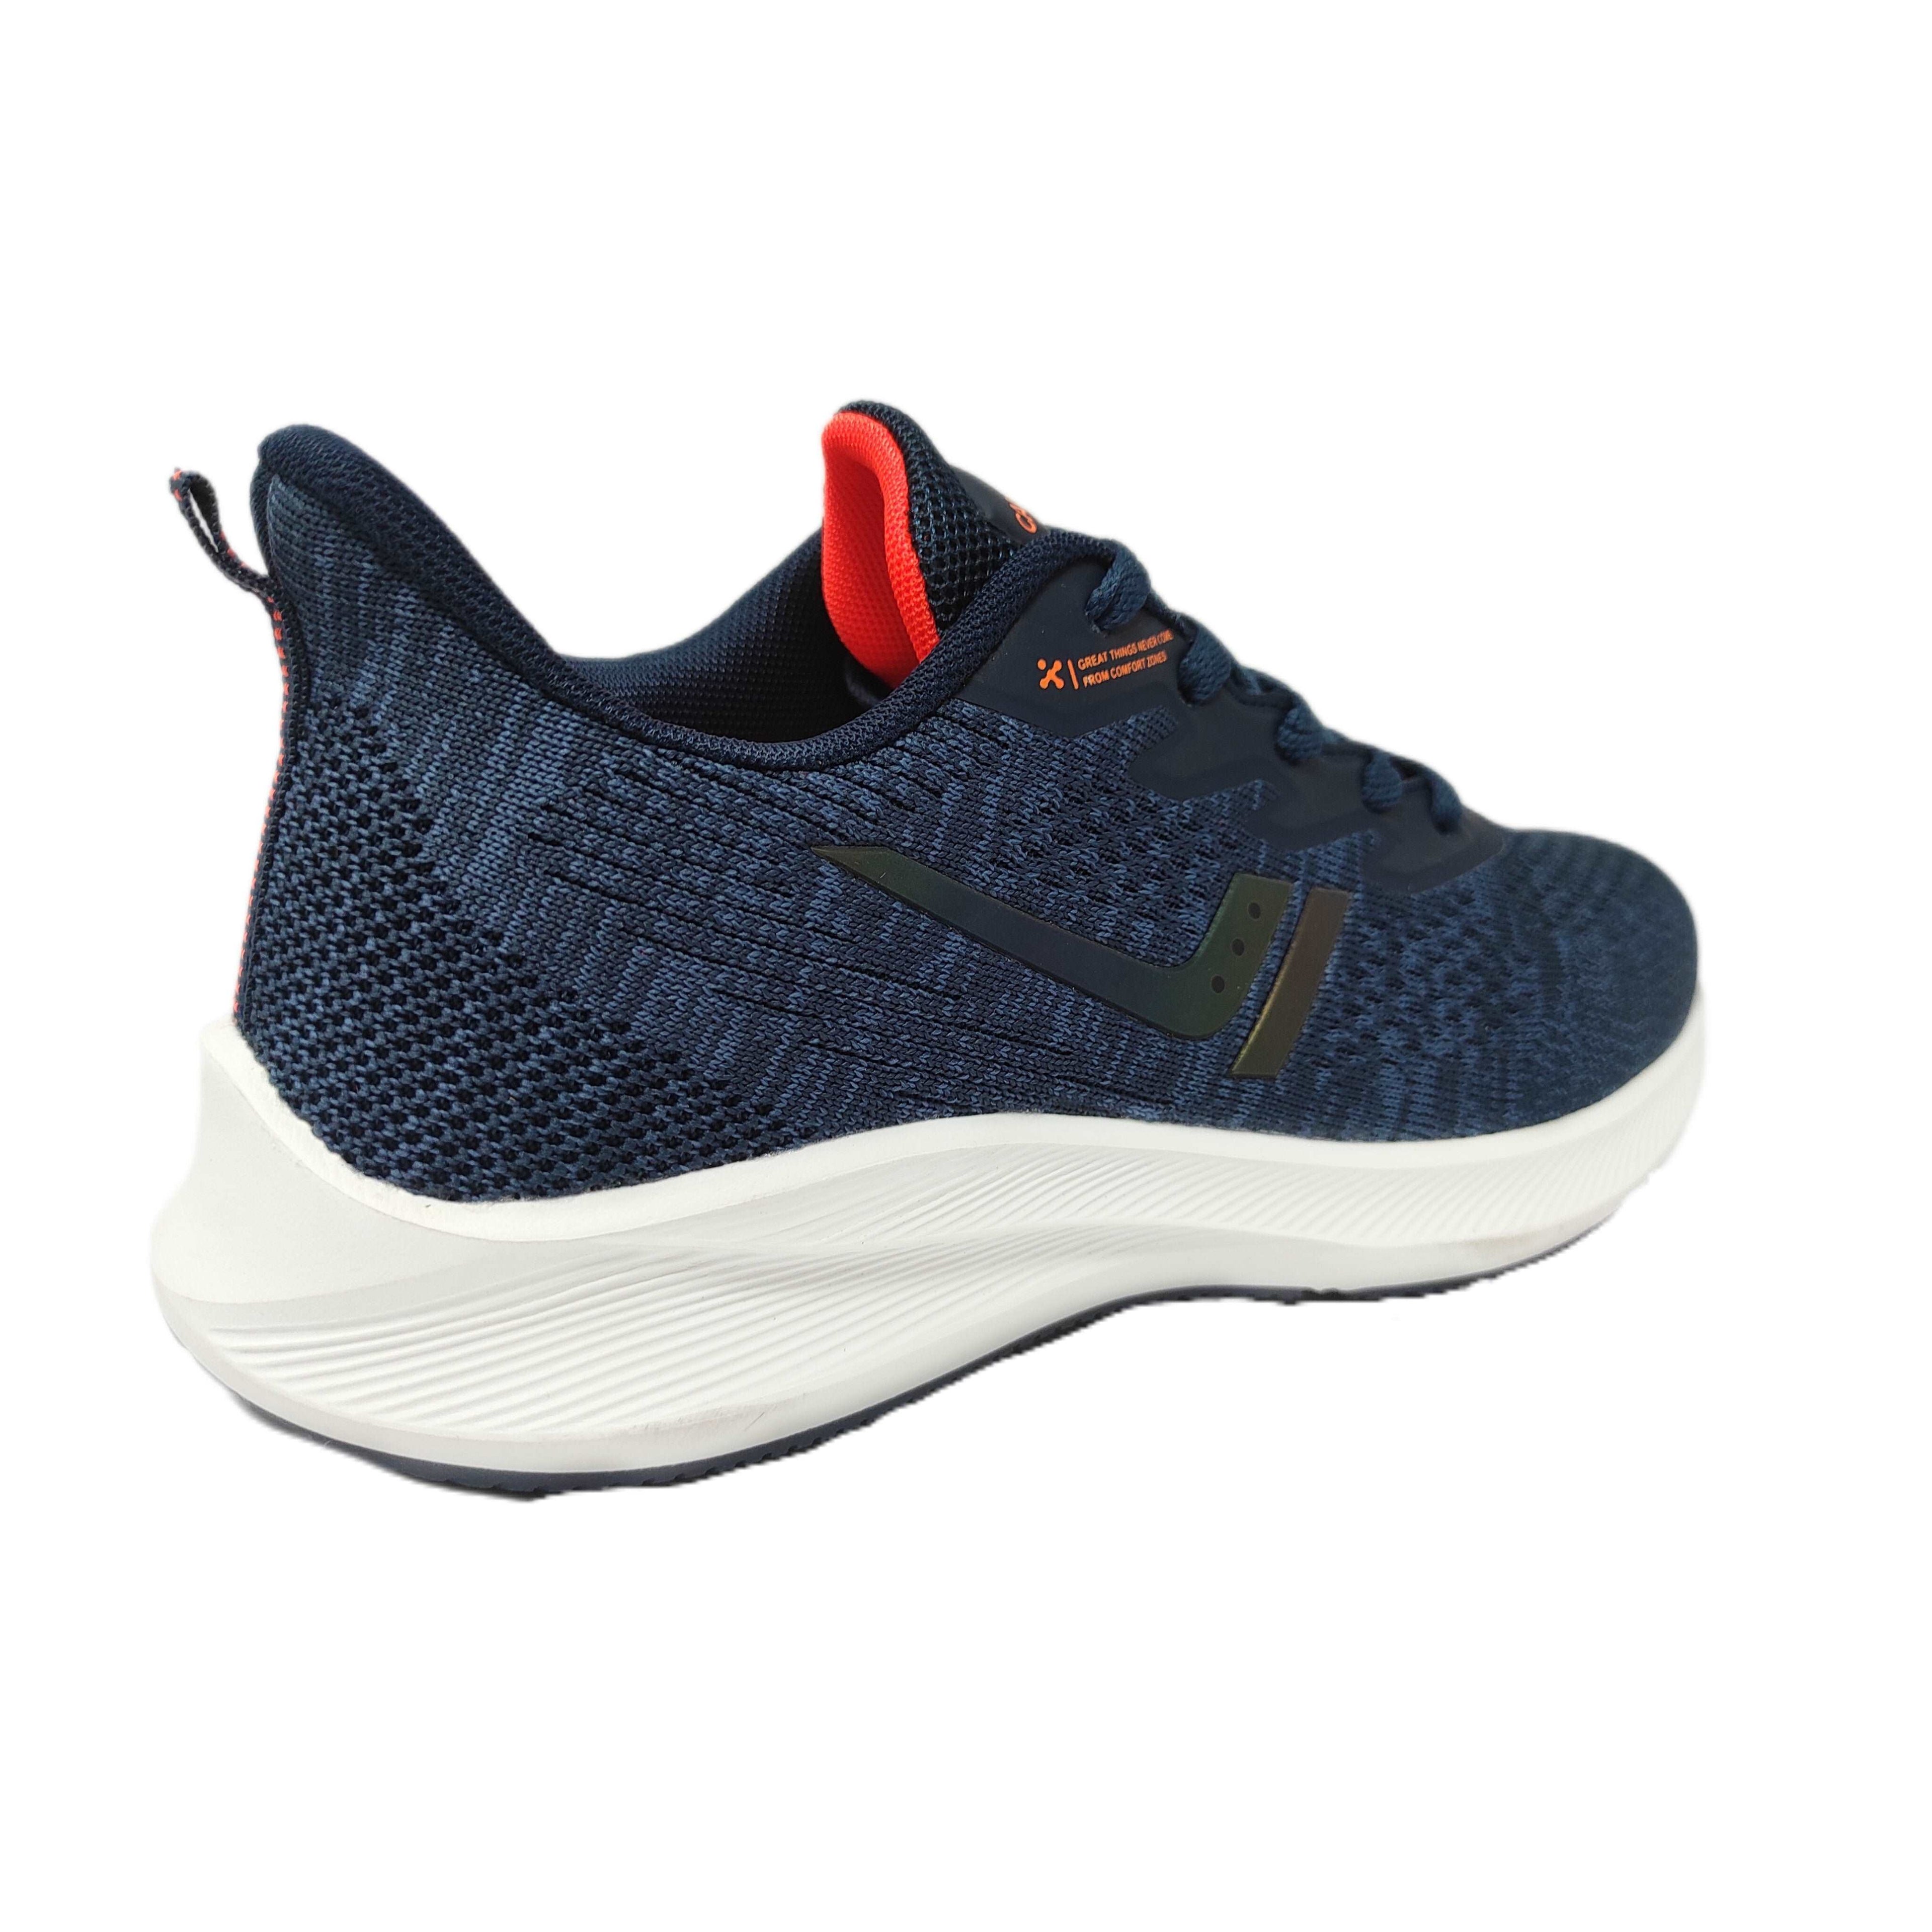 Calcetto CLT-0964 Blue Running Sports Shoe For Men